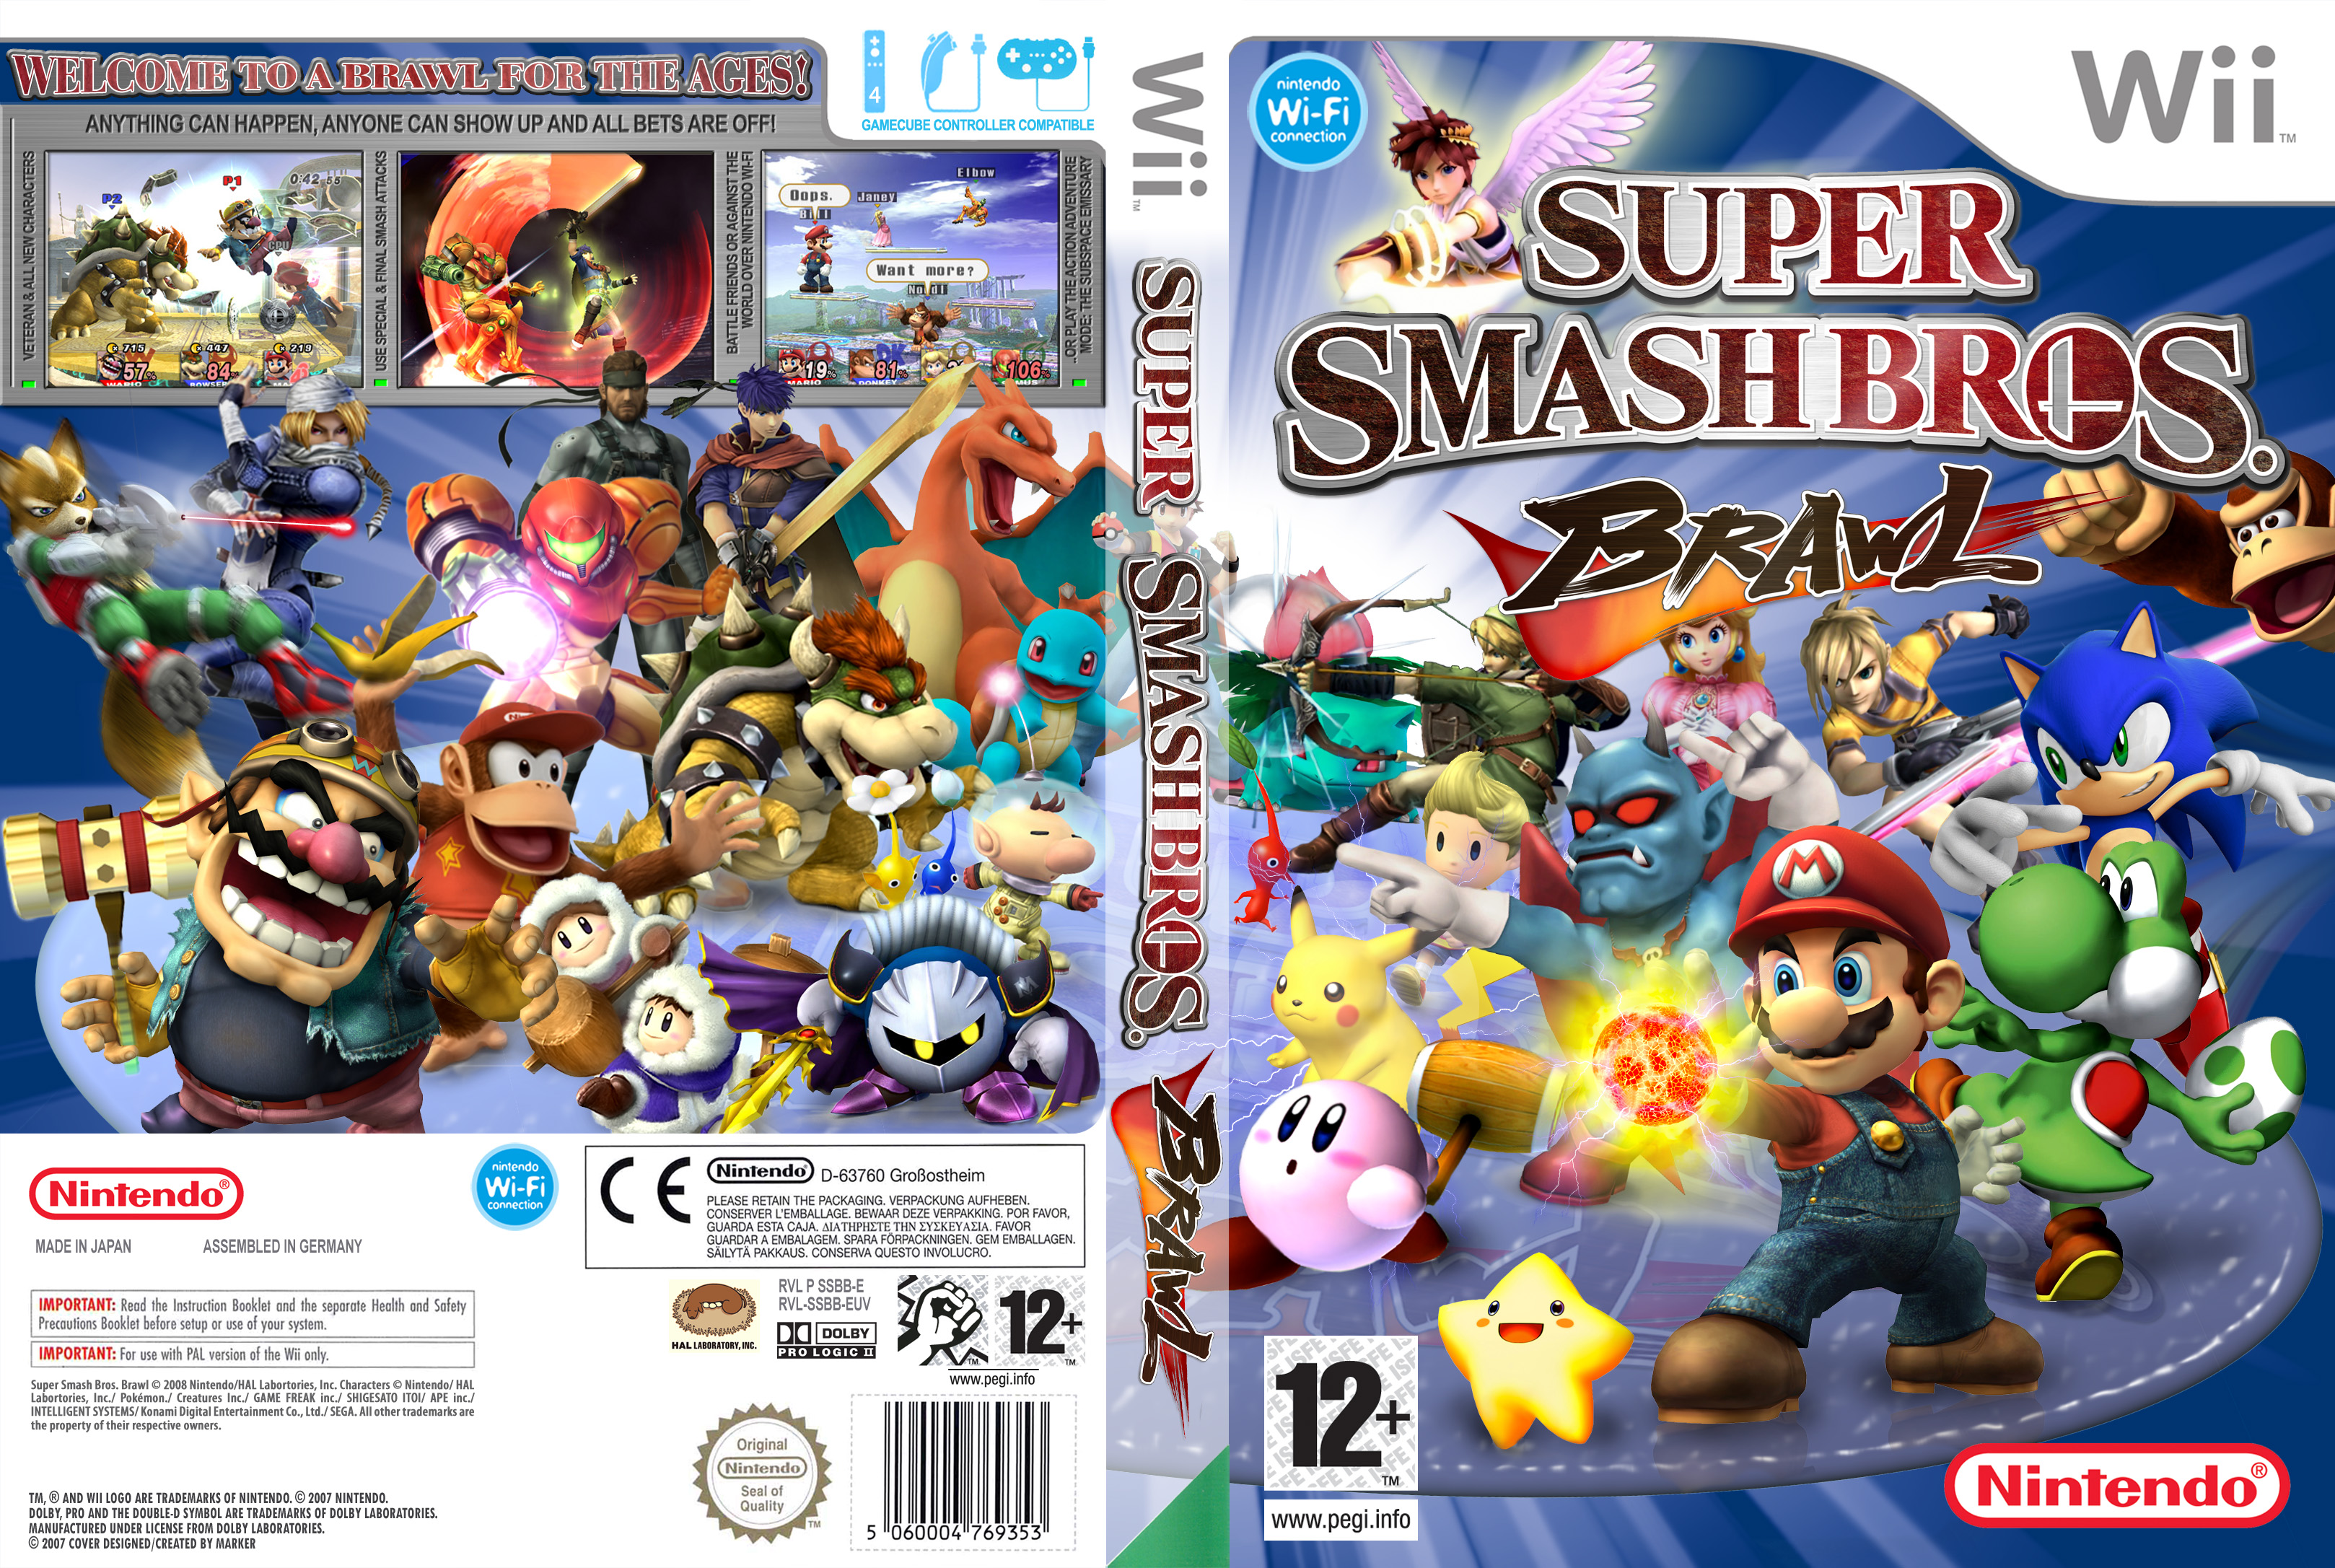 What Is The Next Super Smash Bros Game After Brawl